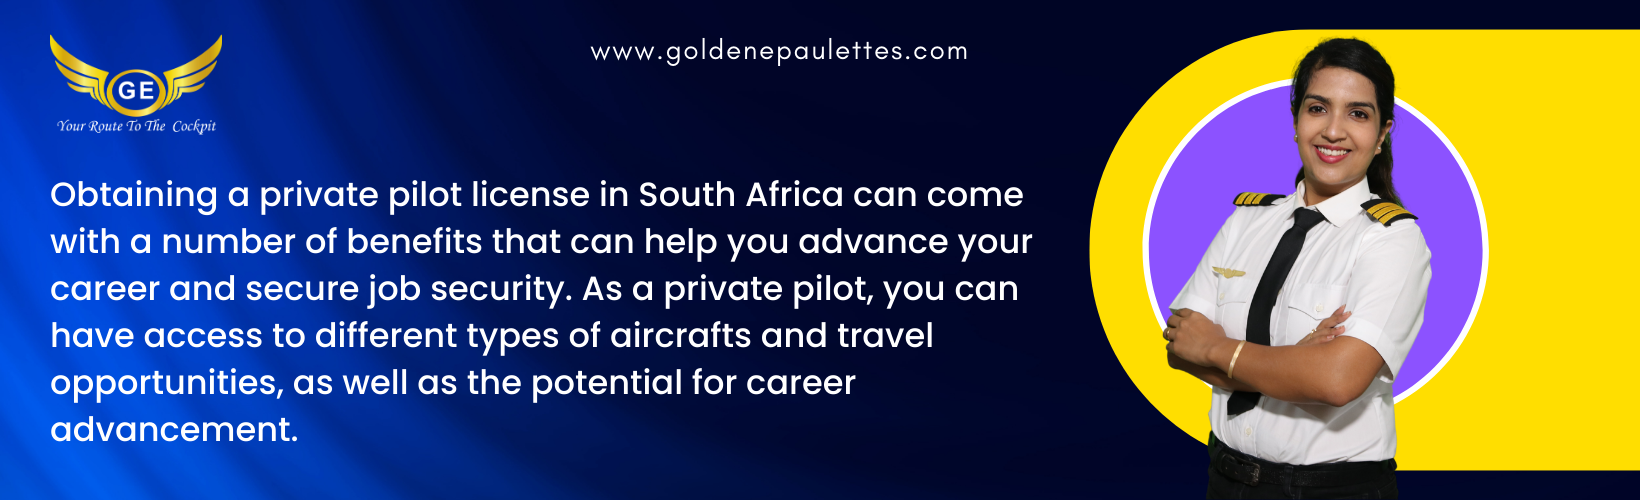 What Are the Benefits of Obtaining a Private Pilot License in South Africa